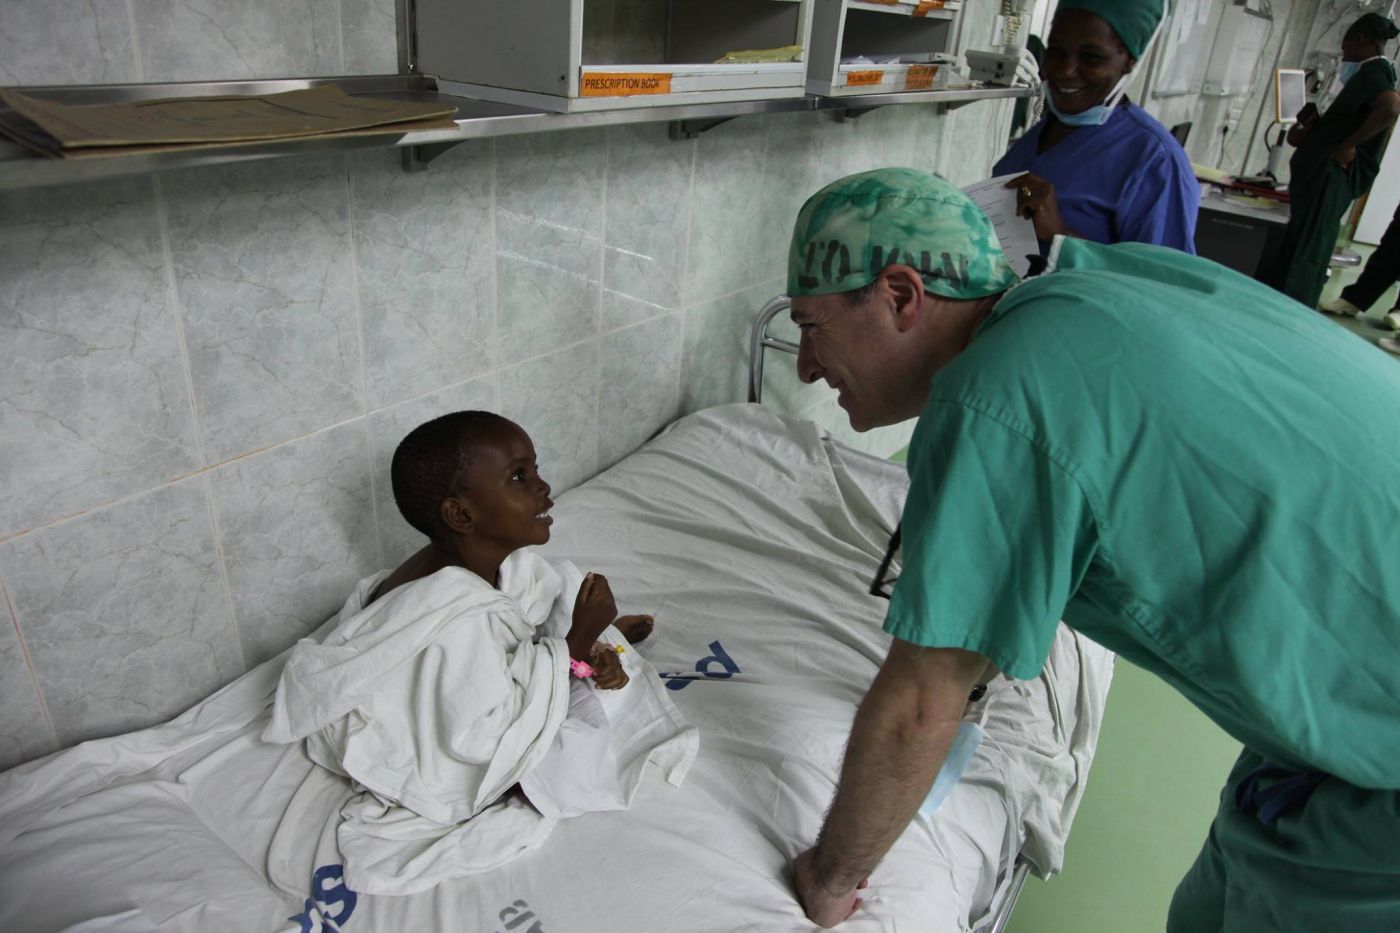 Dr. Greenfield charms a young patient (and vice versa), Tanzania 2014